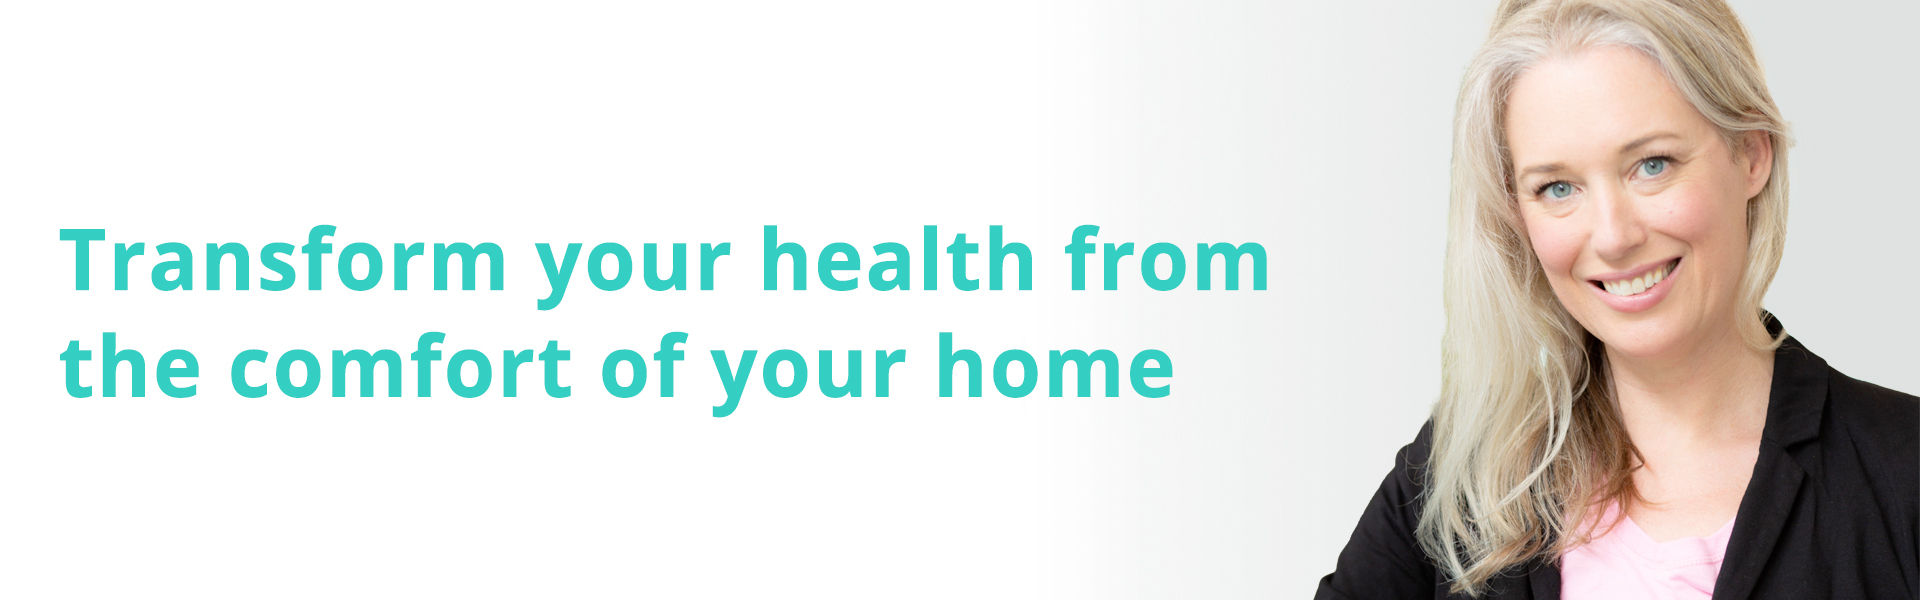 Transform your health from the comfort of your home